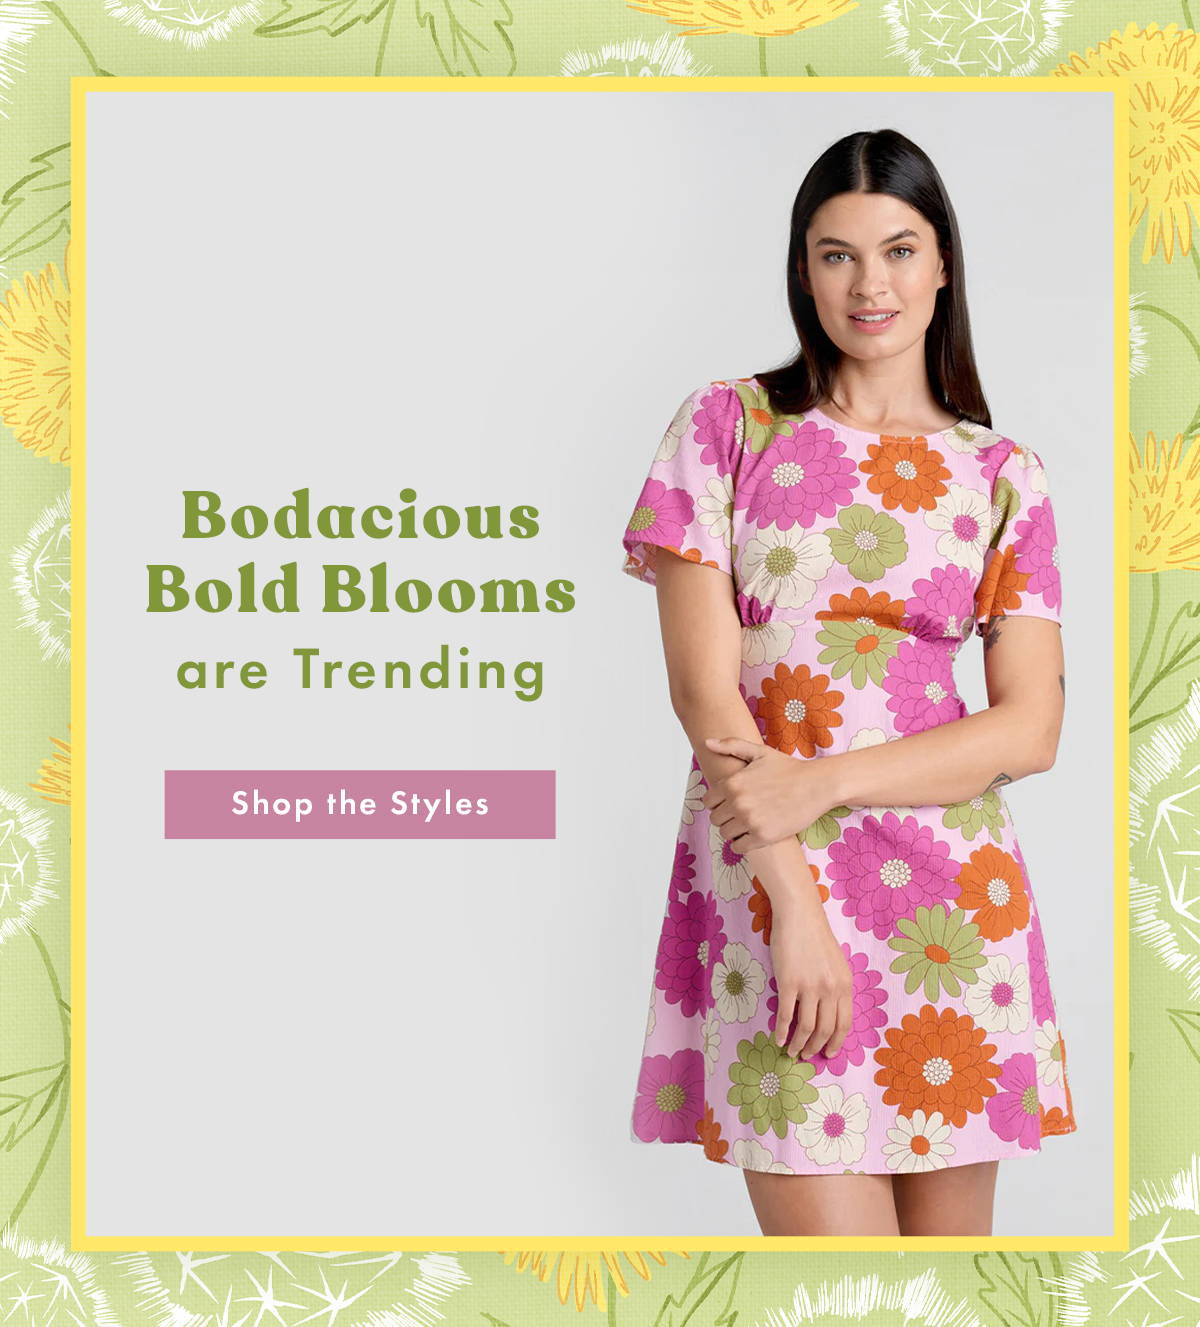 Bodacious Bold Blooms are Trending | SHOP THE STYLES